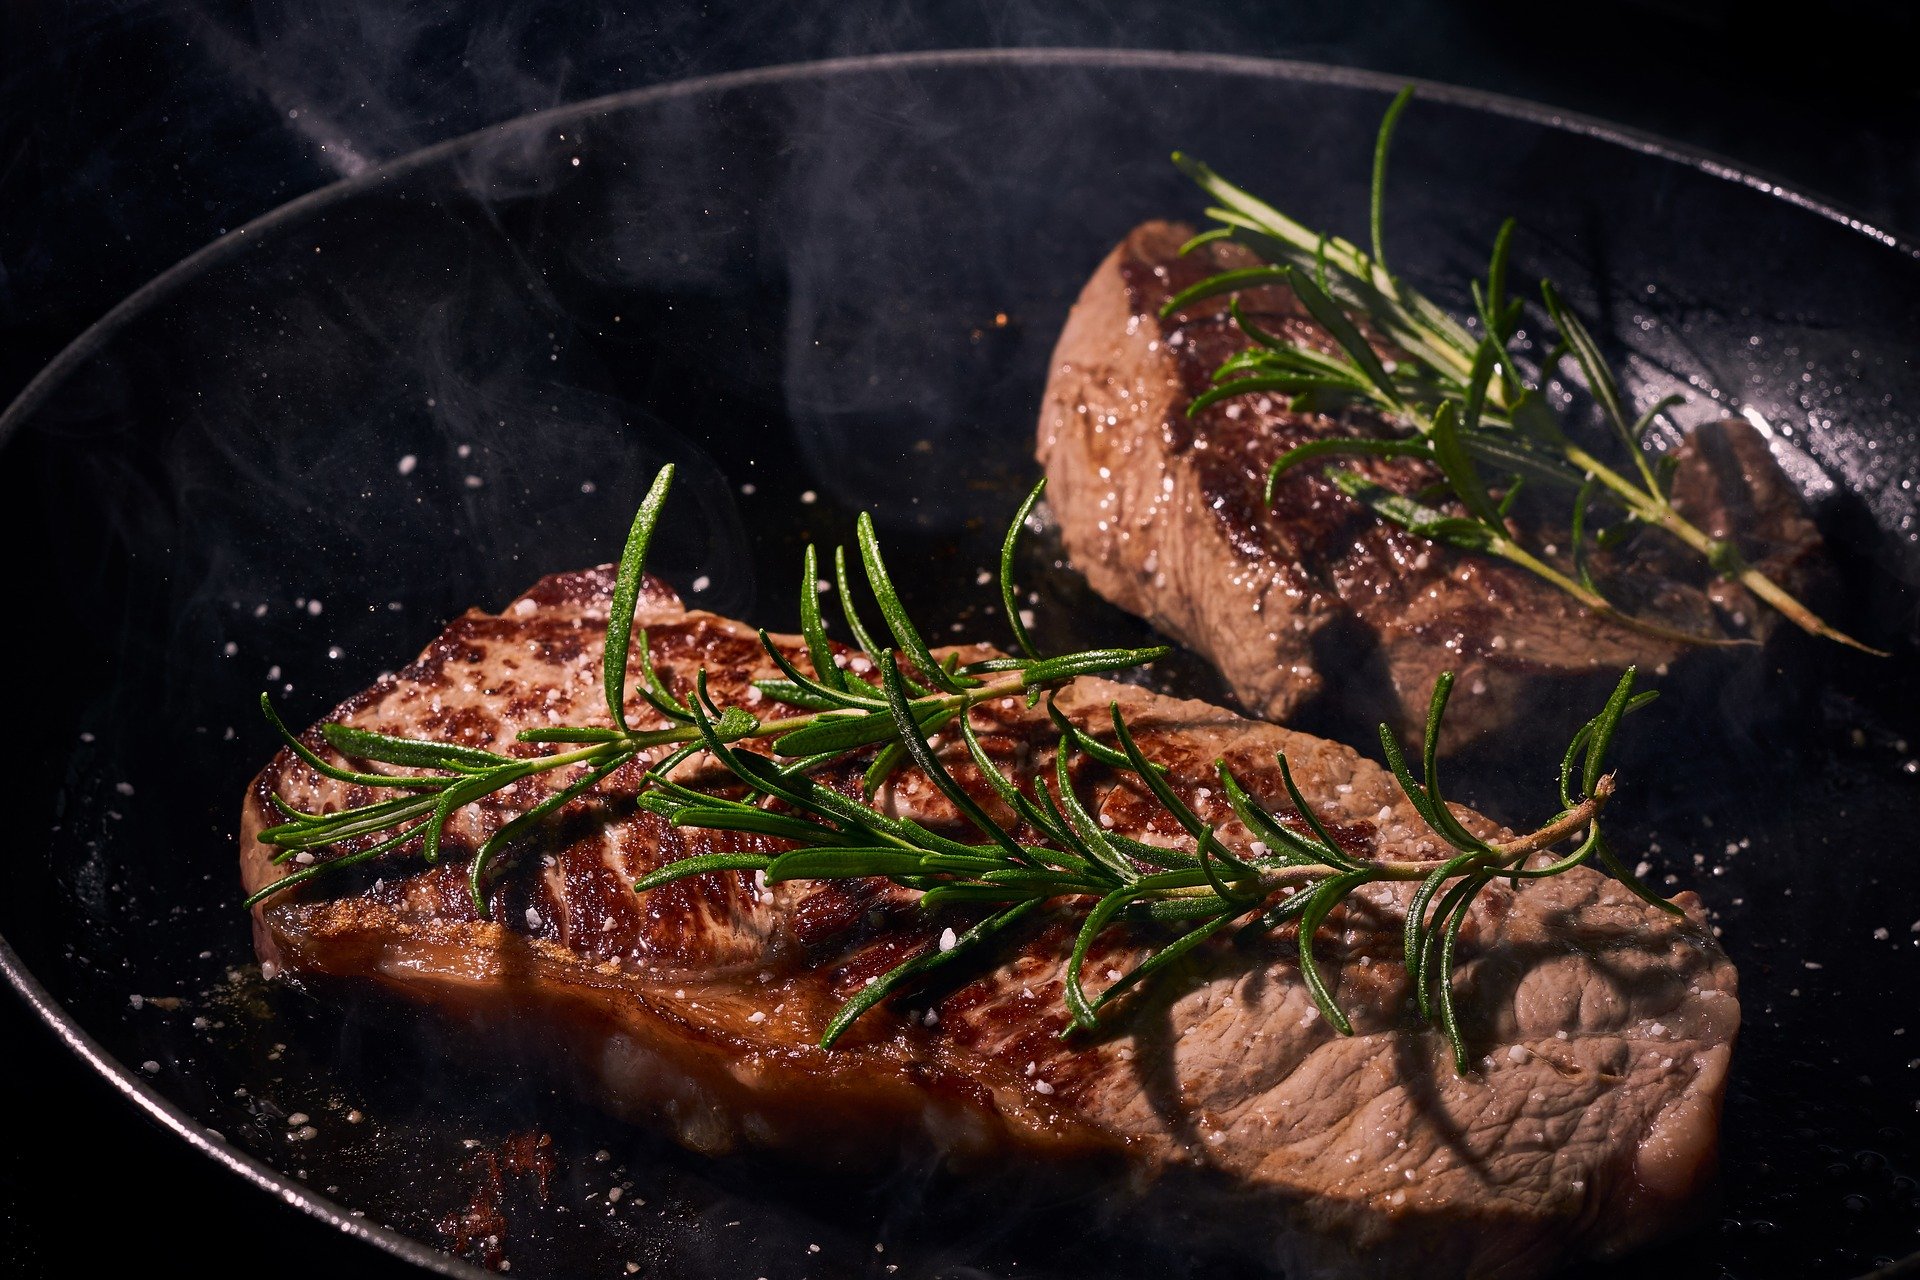 Sprigs of rosemary used to flavor some steak cuts in a pan | Photo: Pixabay/Felix Wolf